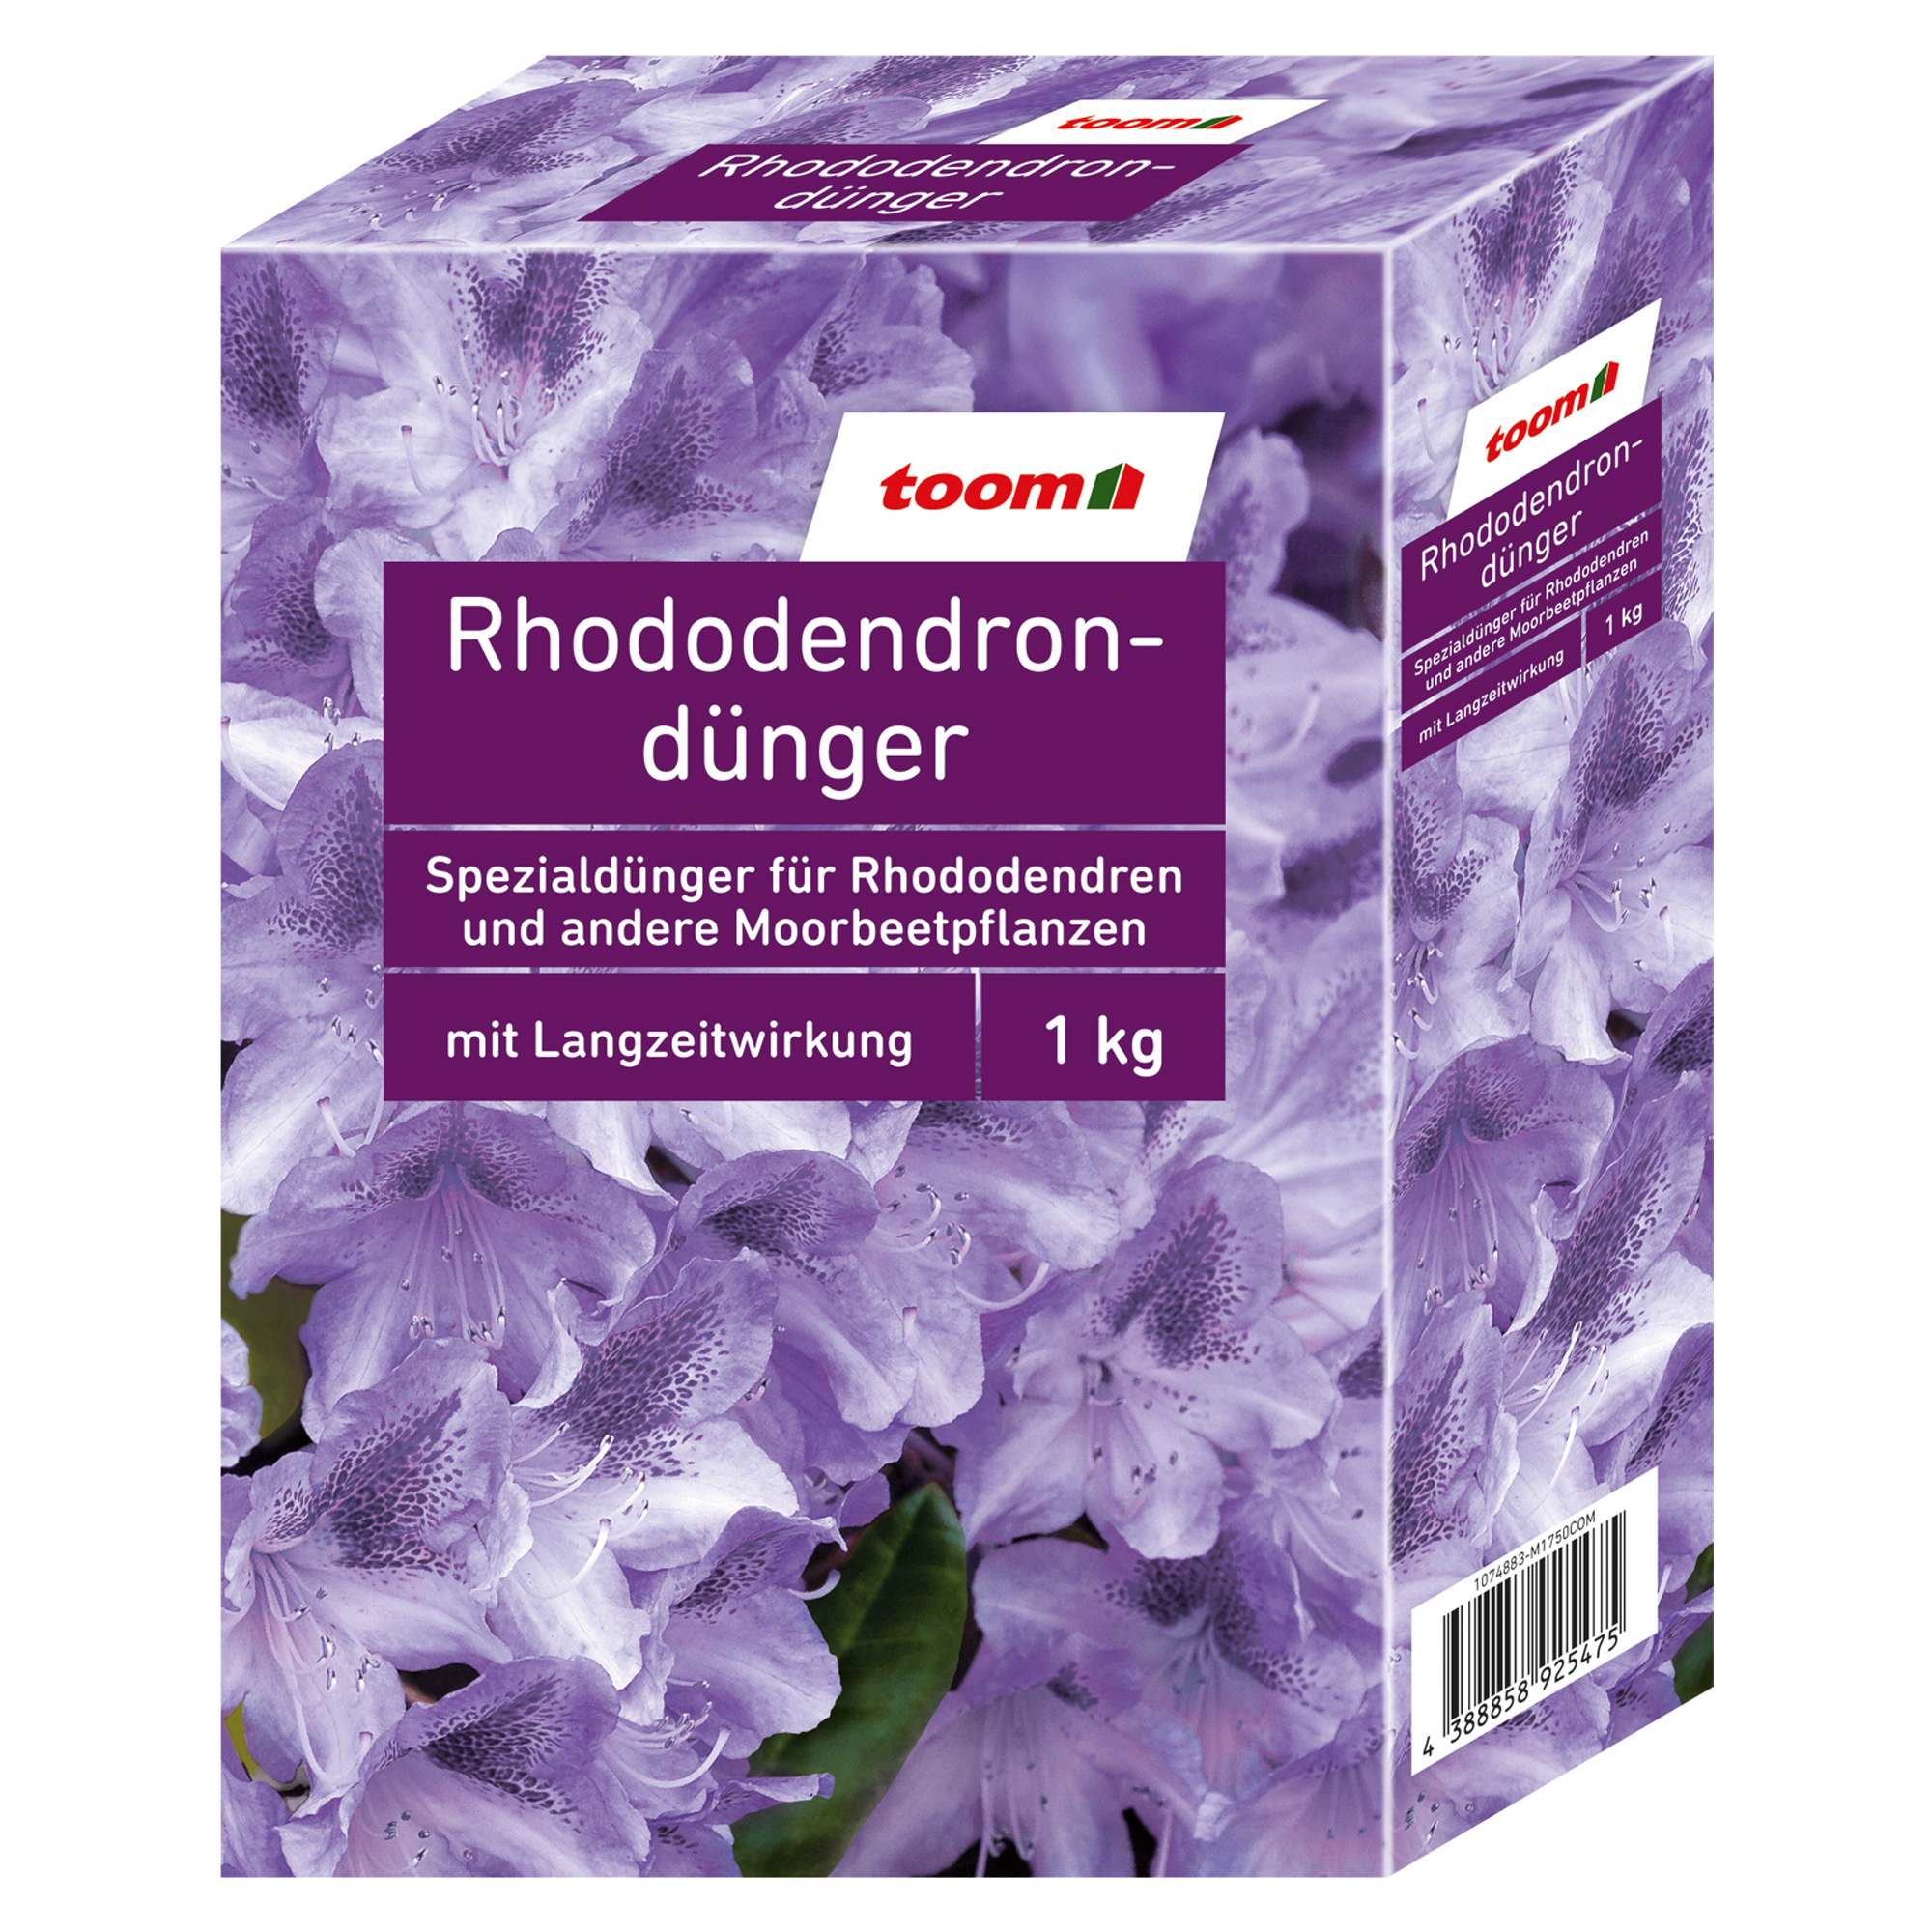 Rhododendrondünger 1 kg + product picture